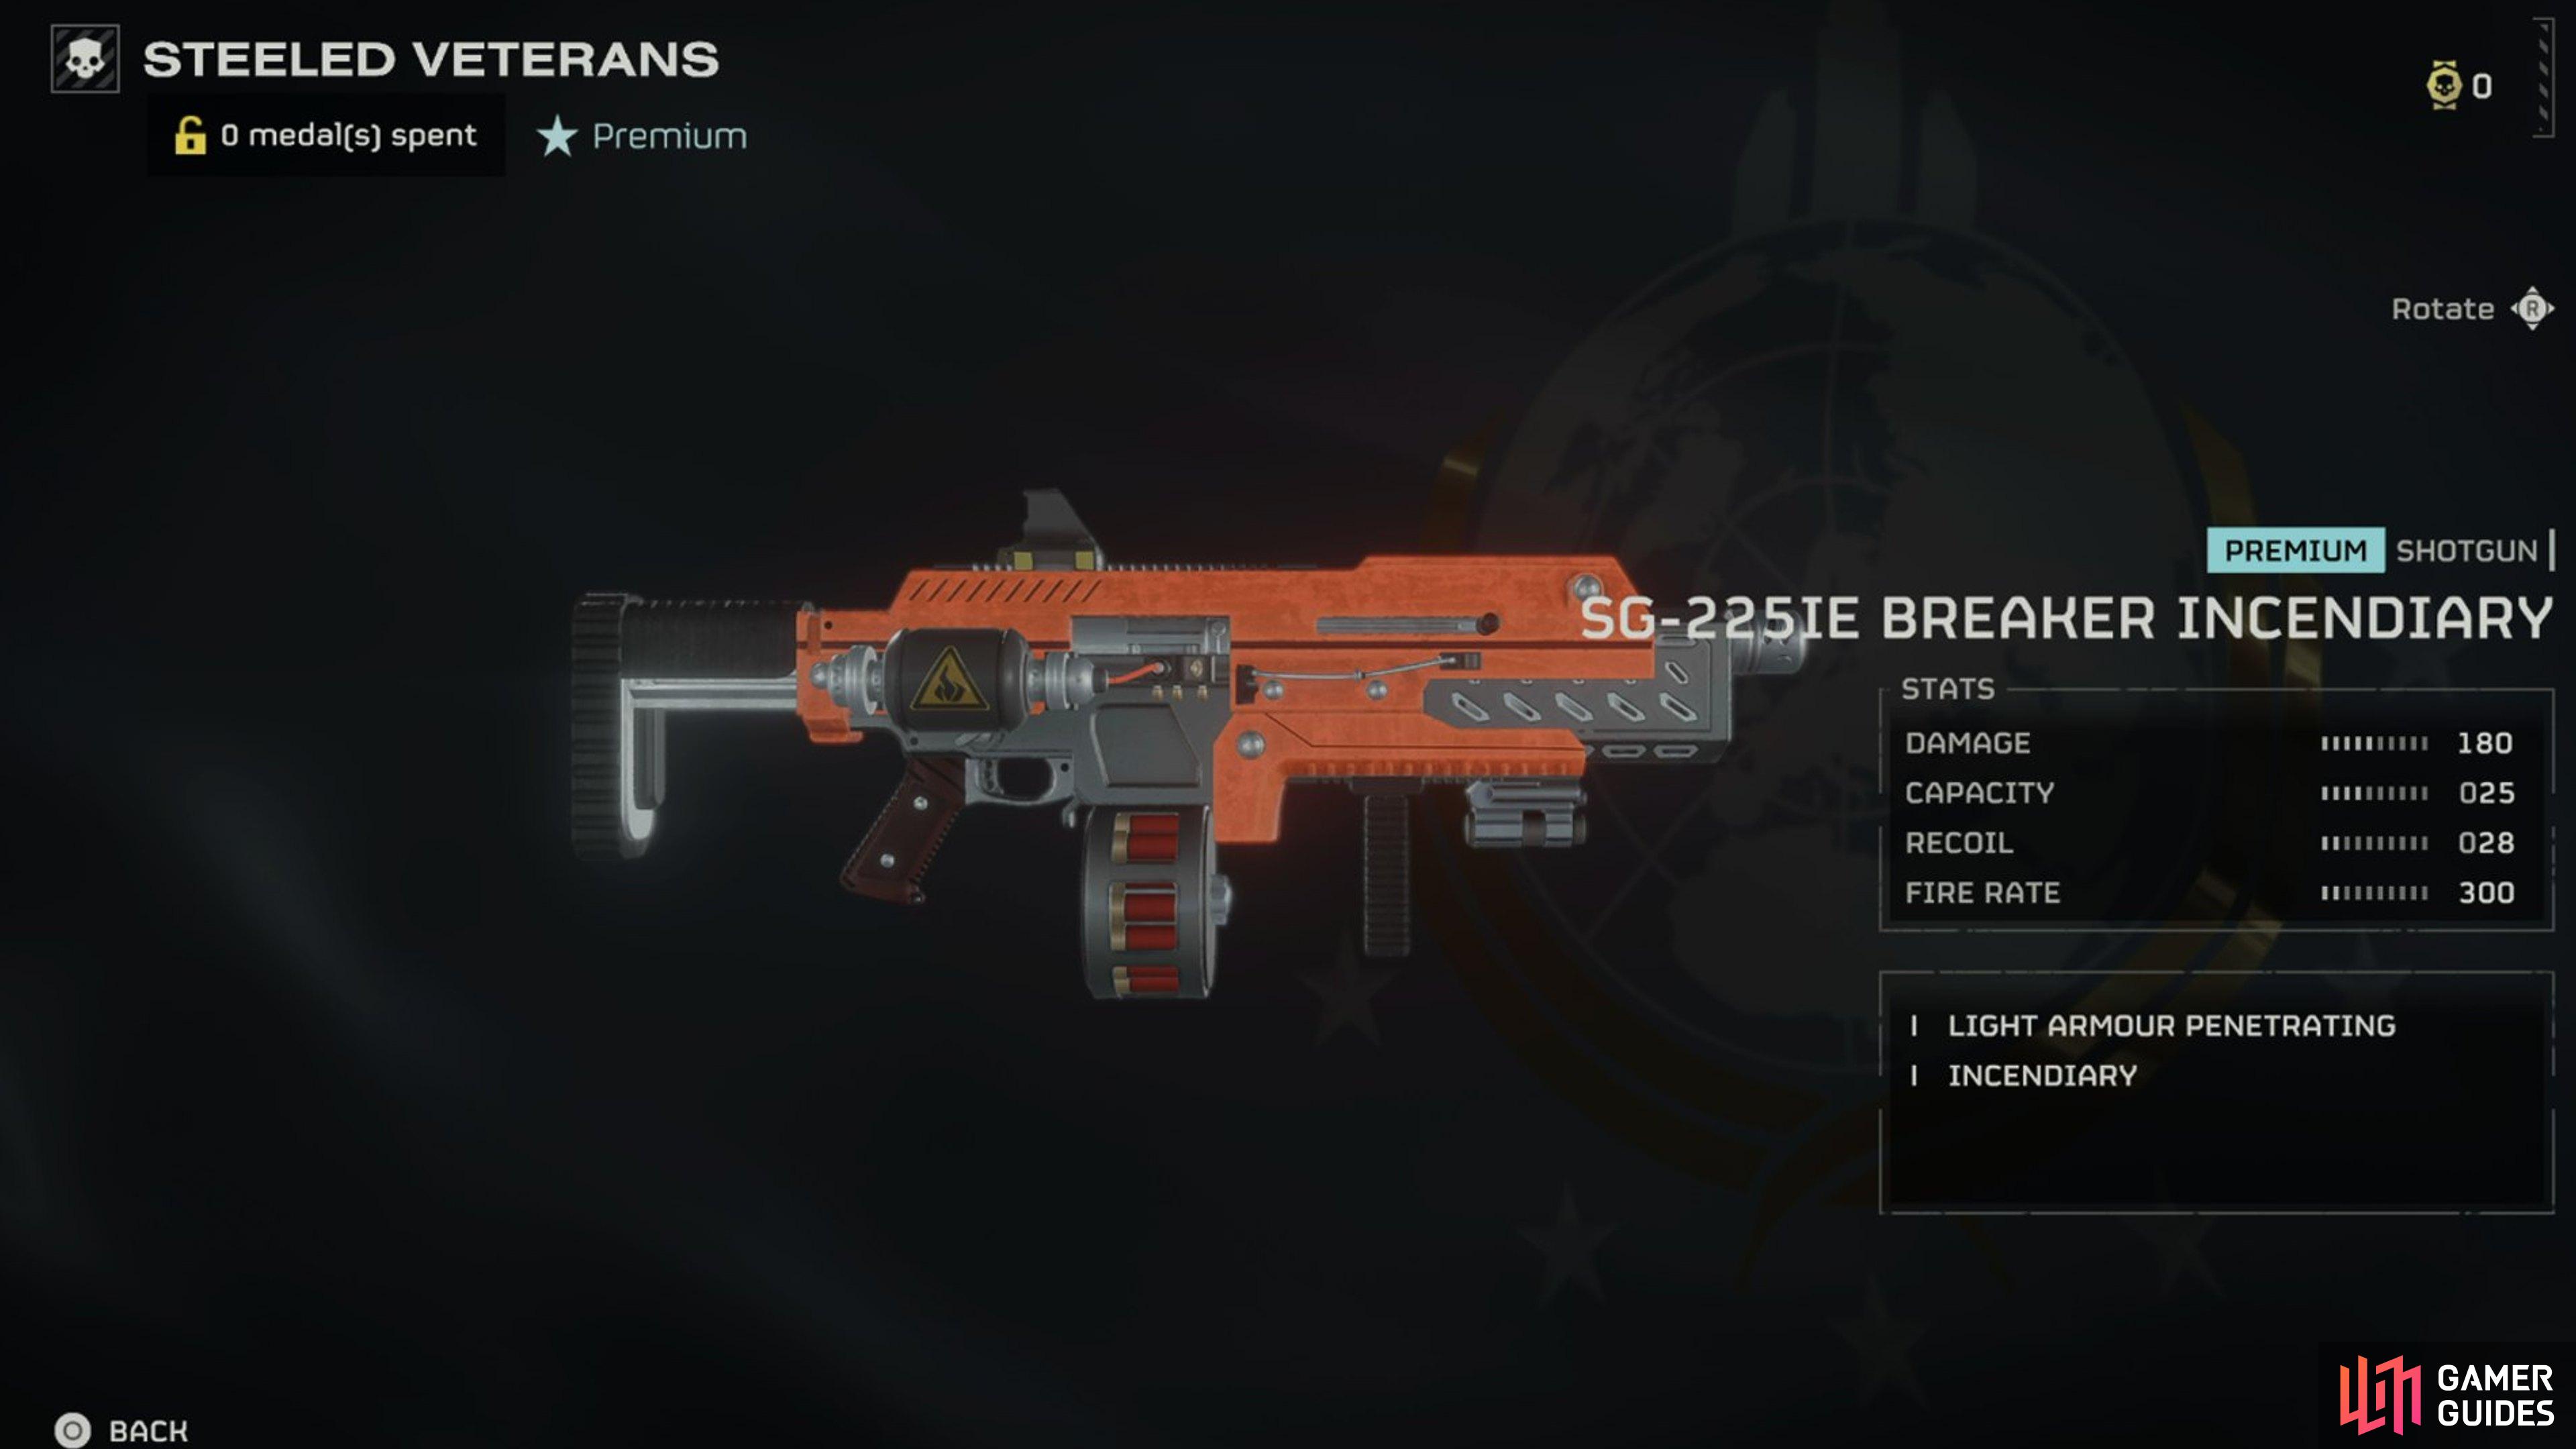 Spray and pray fire with this variant of the Breaker.